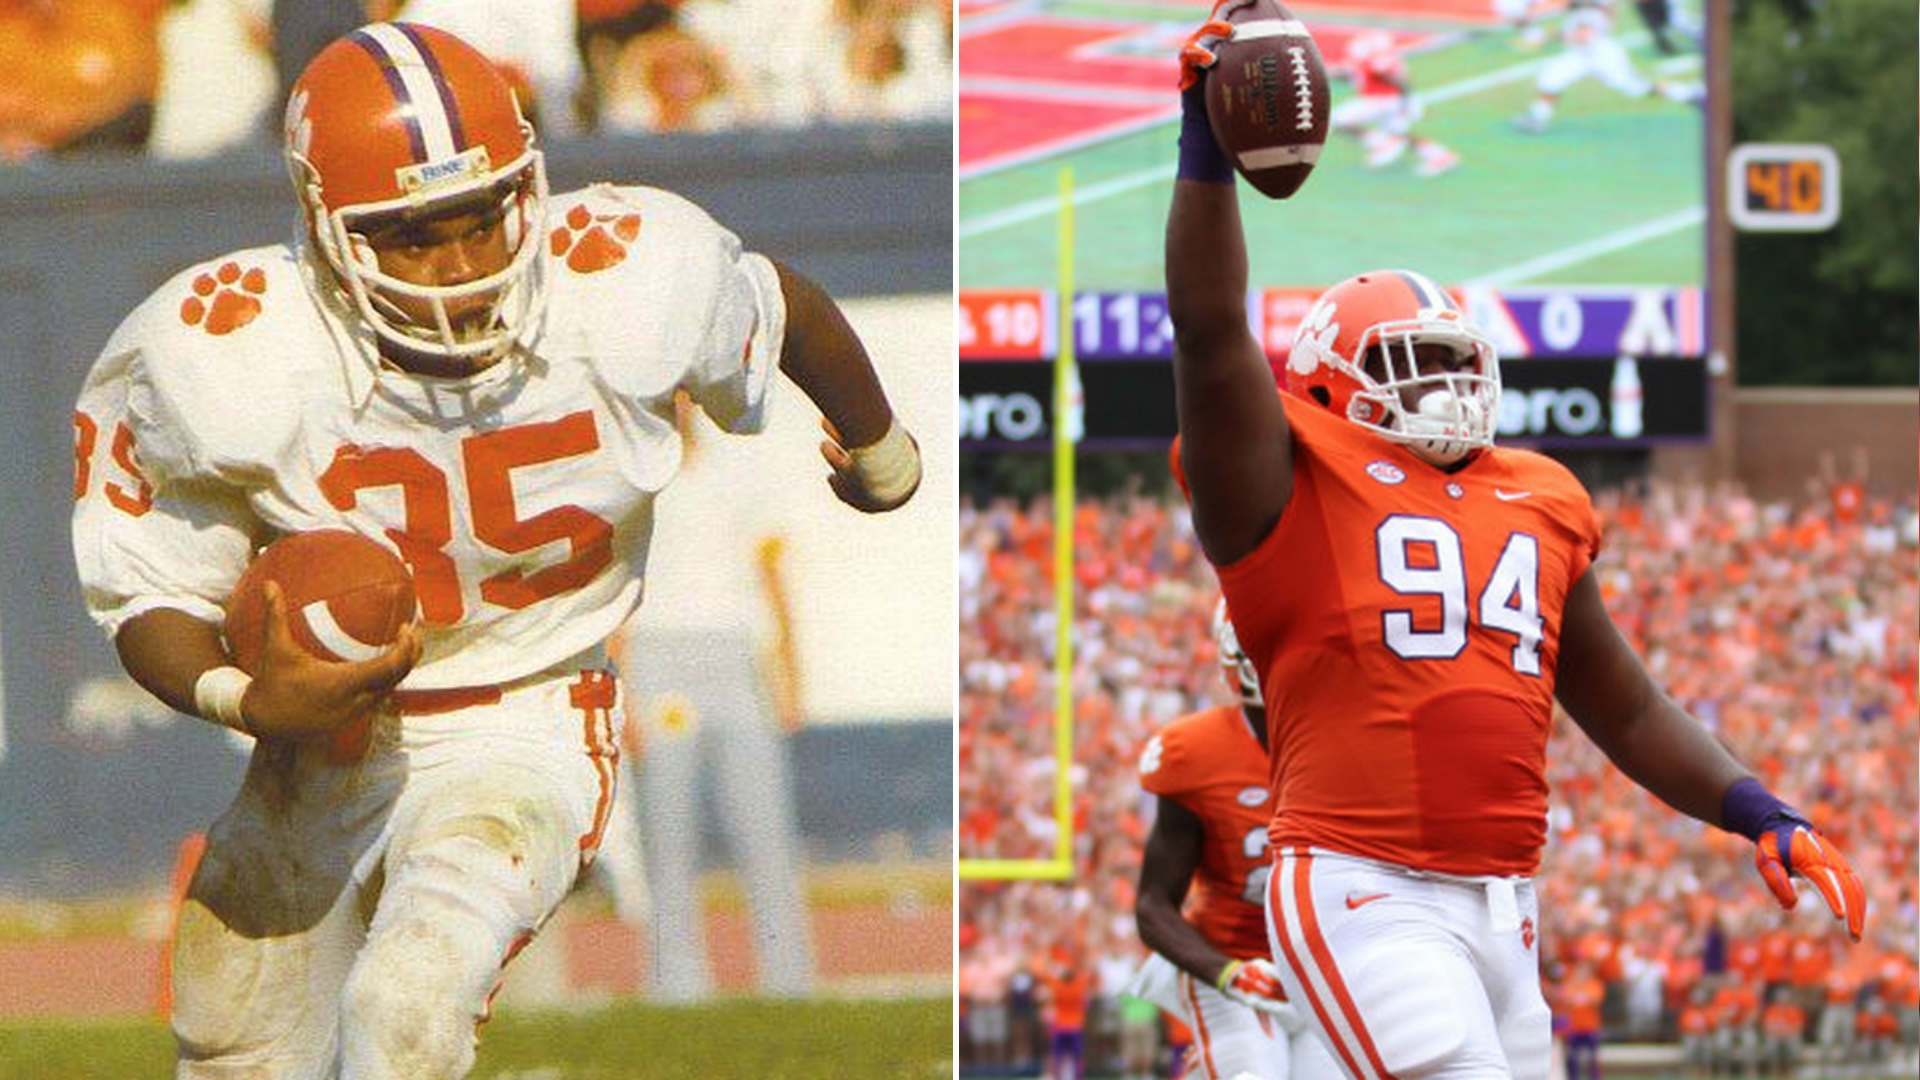 Then and now: How two undefeated Clemson teams connect one small N.C. town